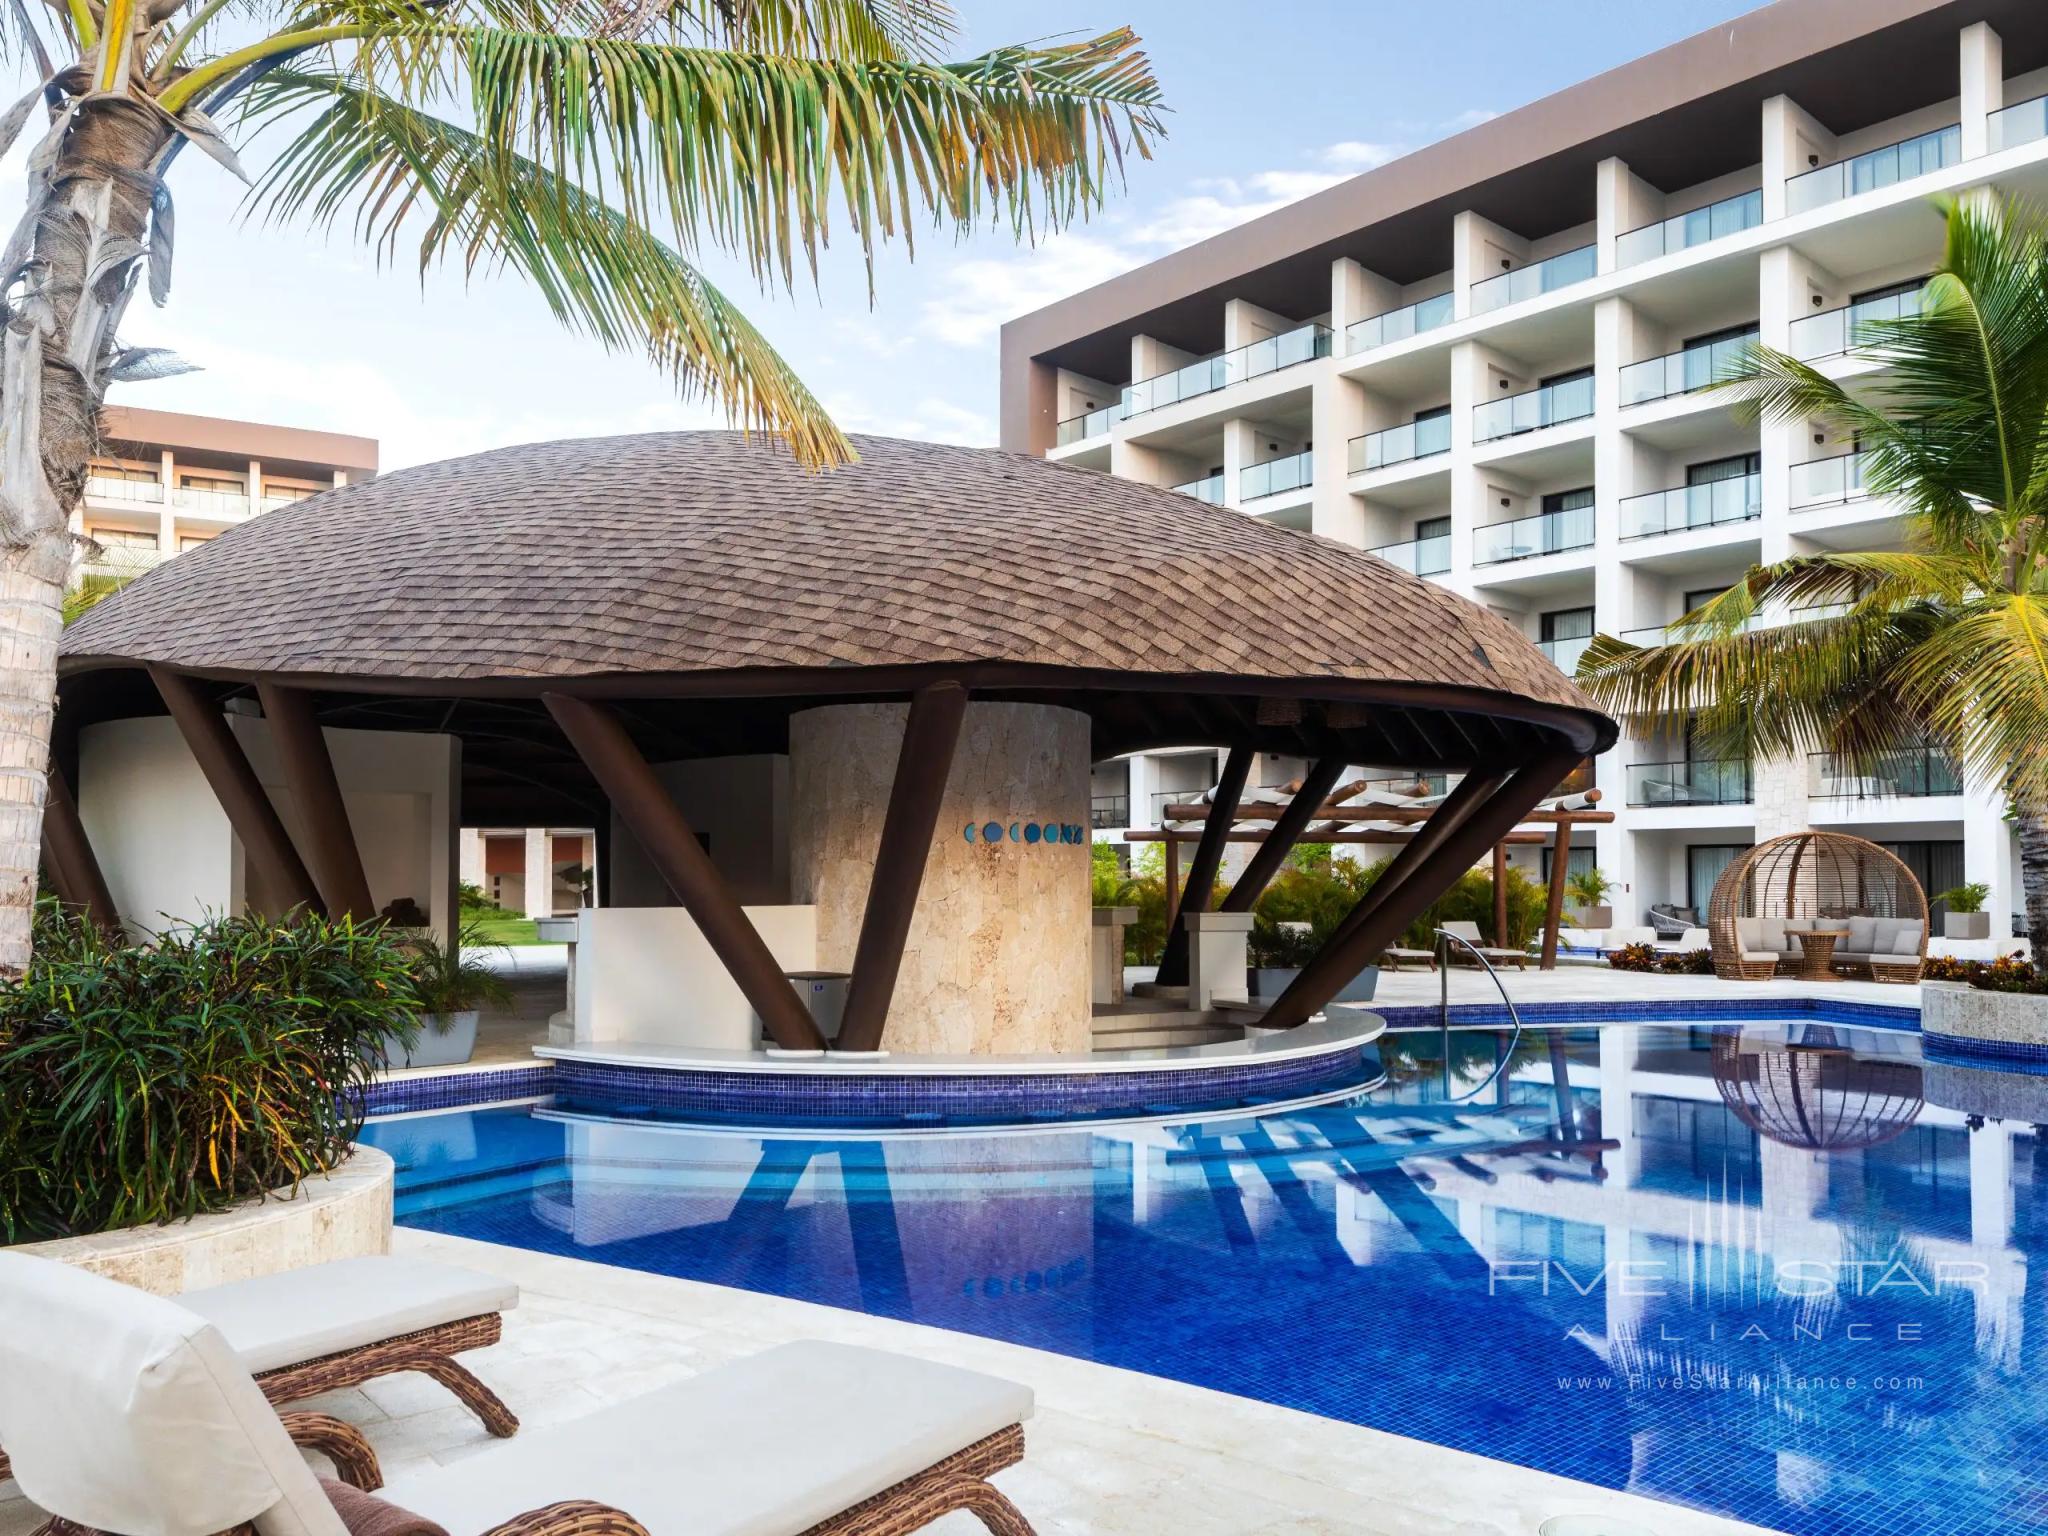 Hyatt Zilara guests have full access to dining options, bars and lounges at Hyatt Ziva Cap Cana